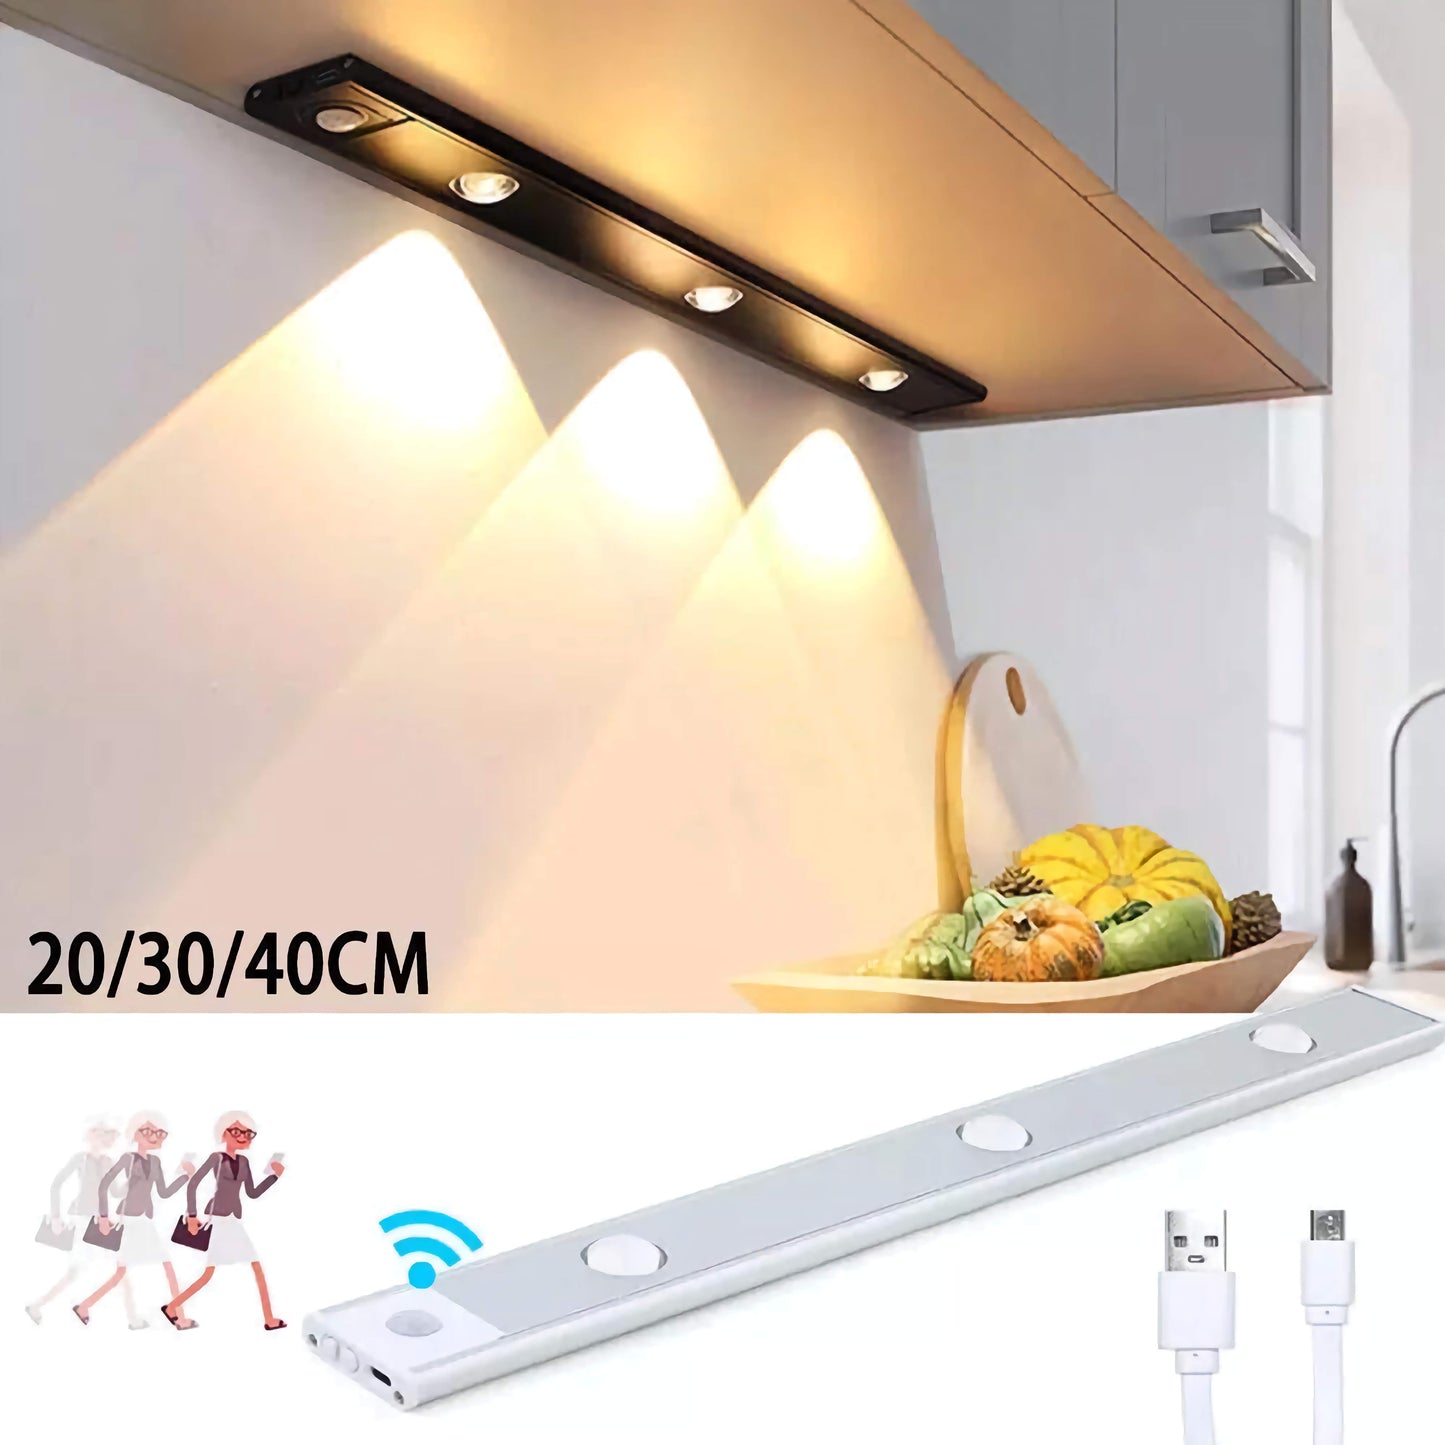 LED light PIR Motion Sensor Cabinet   With USB Rechargeable